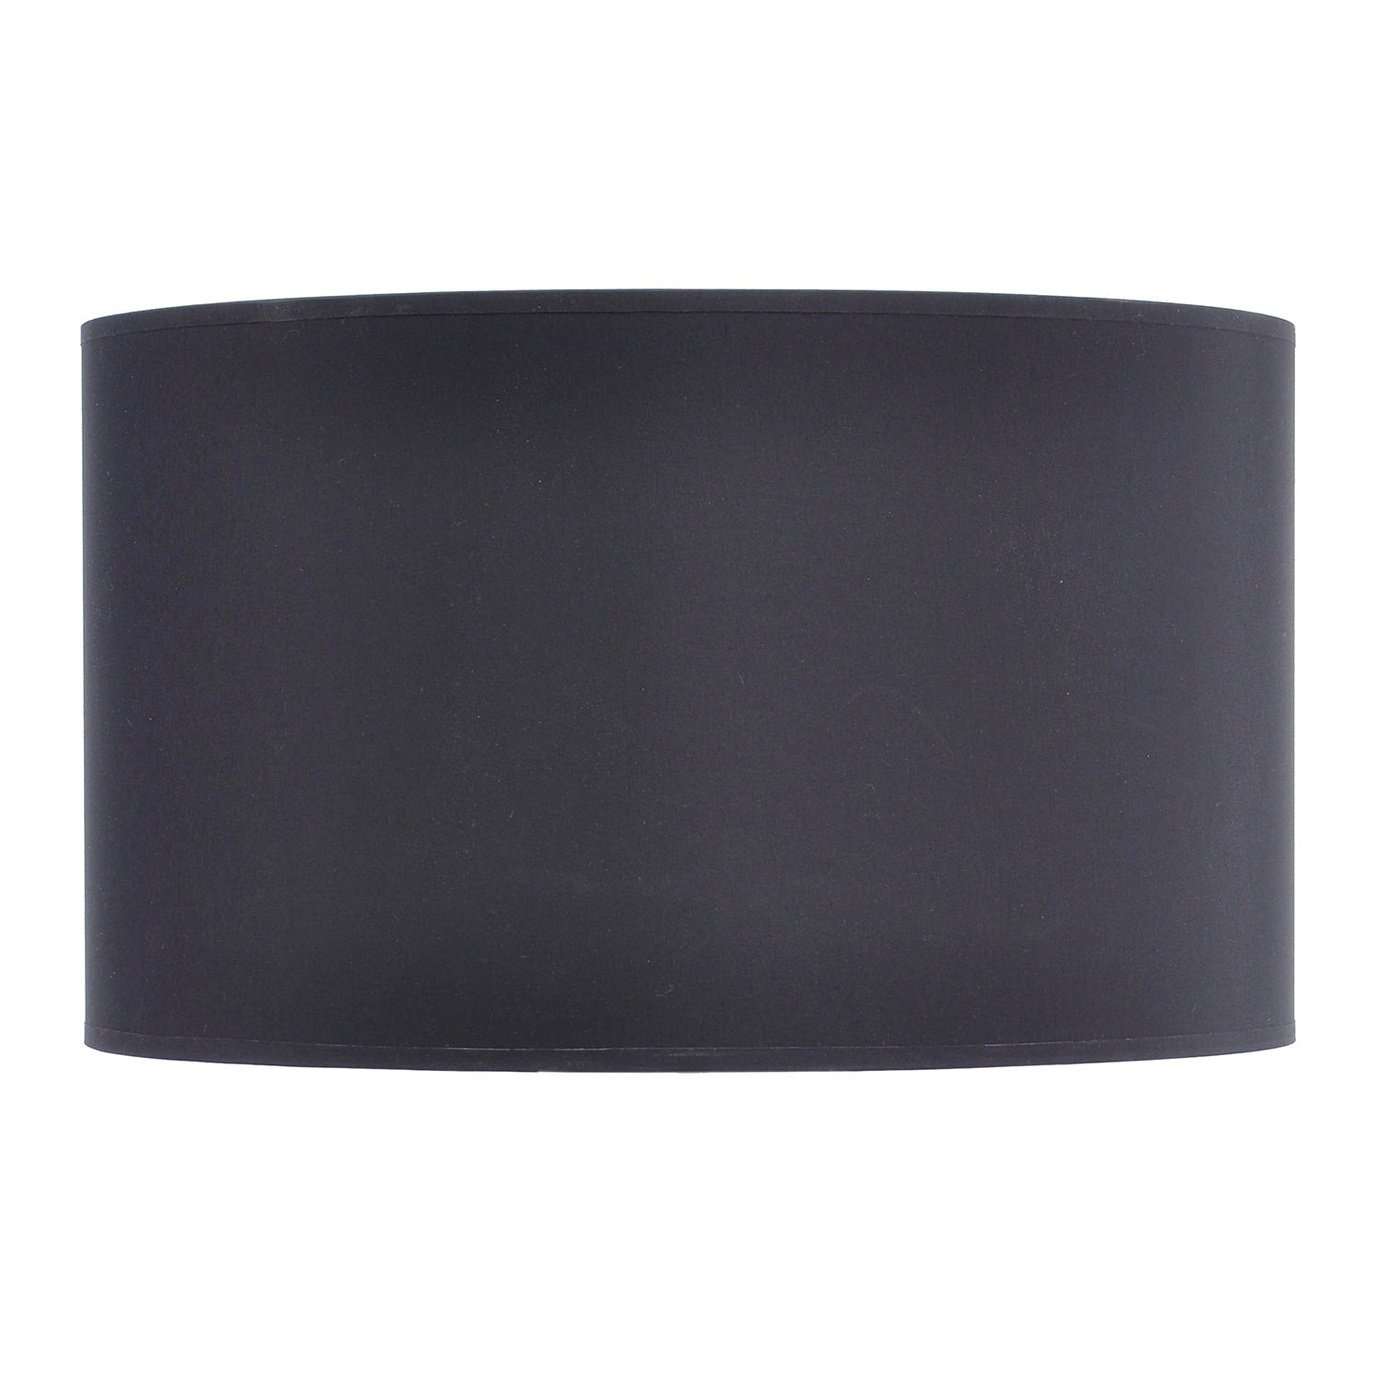 Black and Silver Lined Drum 20" Lampshade